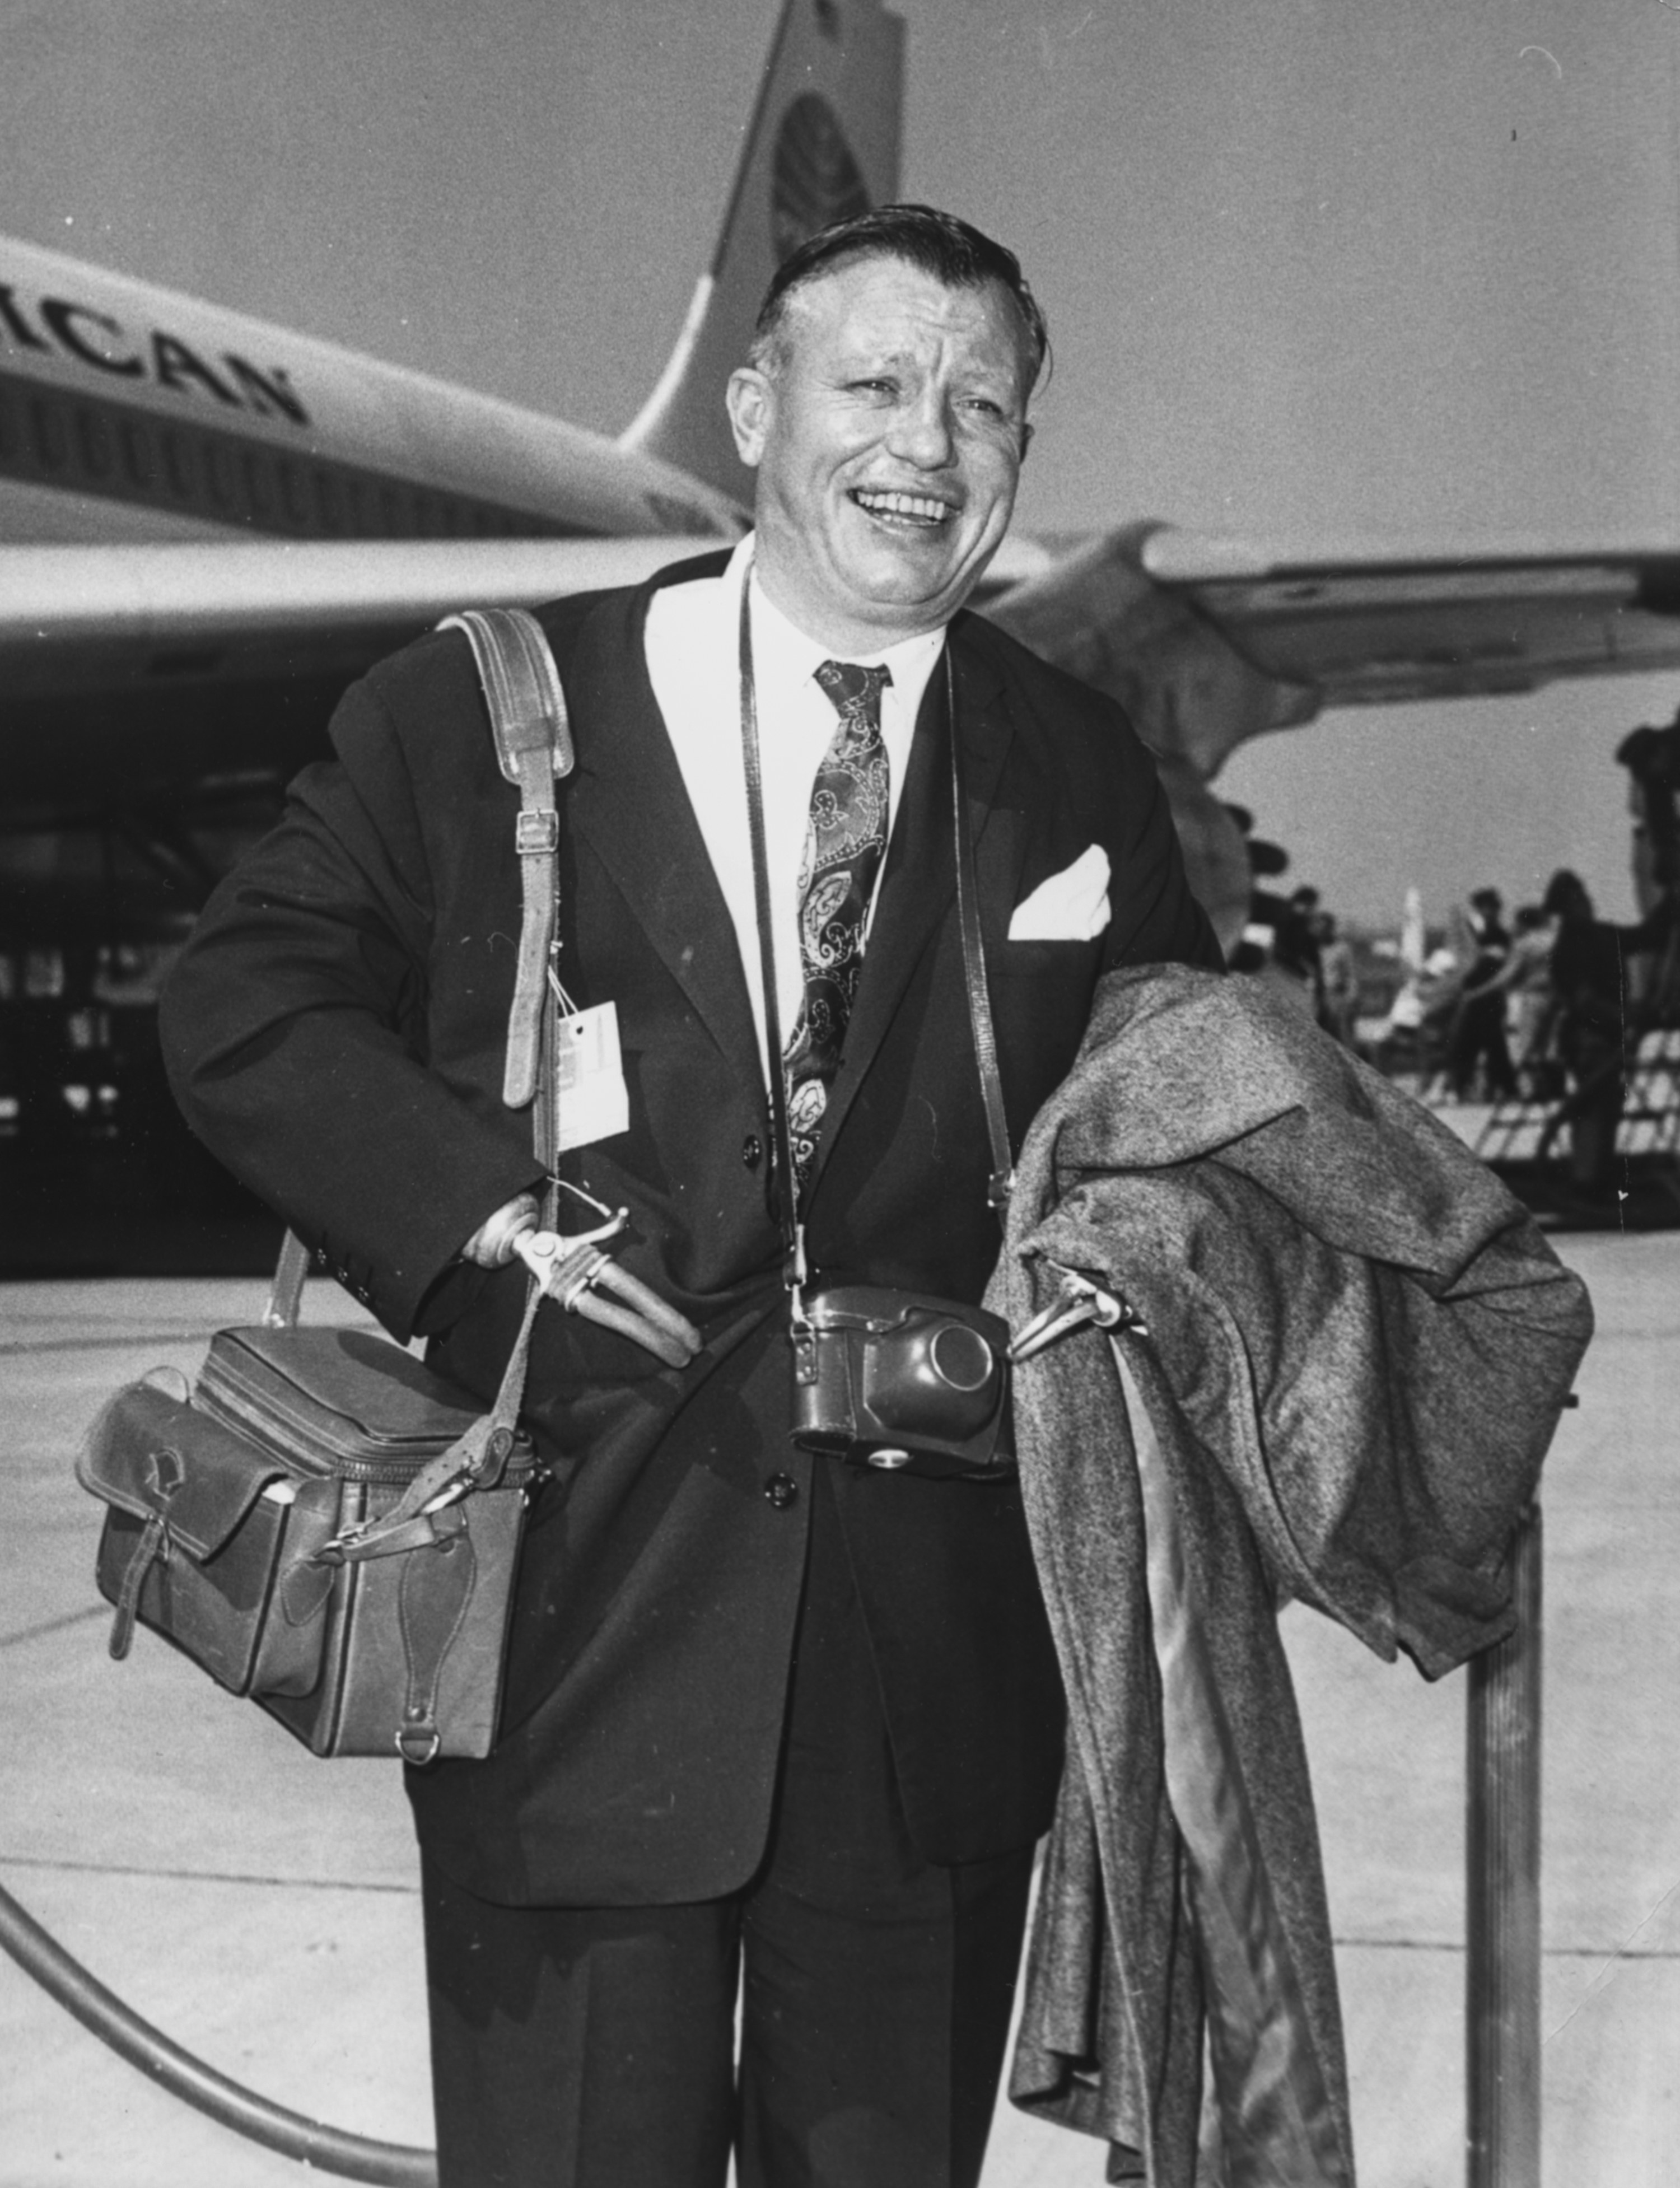 Harold Russell smiling and holding his luggage at an airport